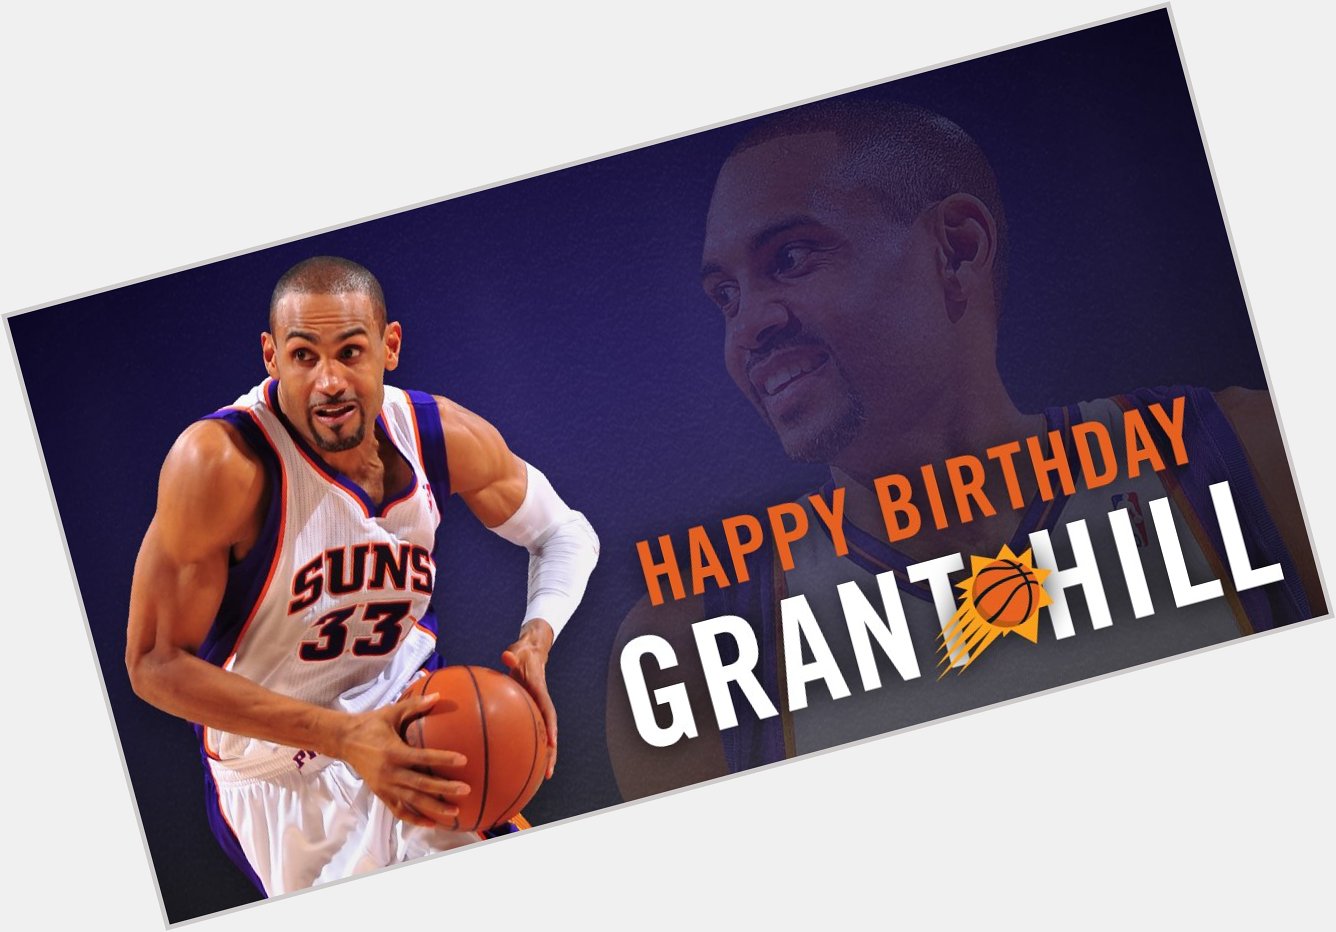 We are also wishing Grant Hill a happy birthday today! and tell us your favorite Grant moment with the Suns! 